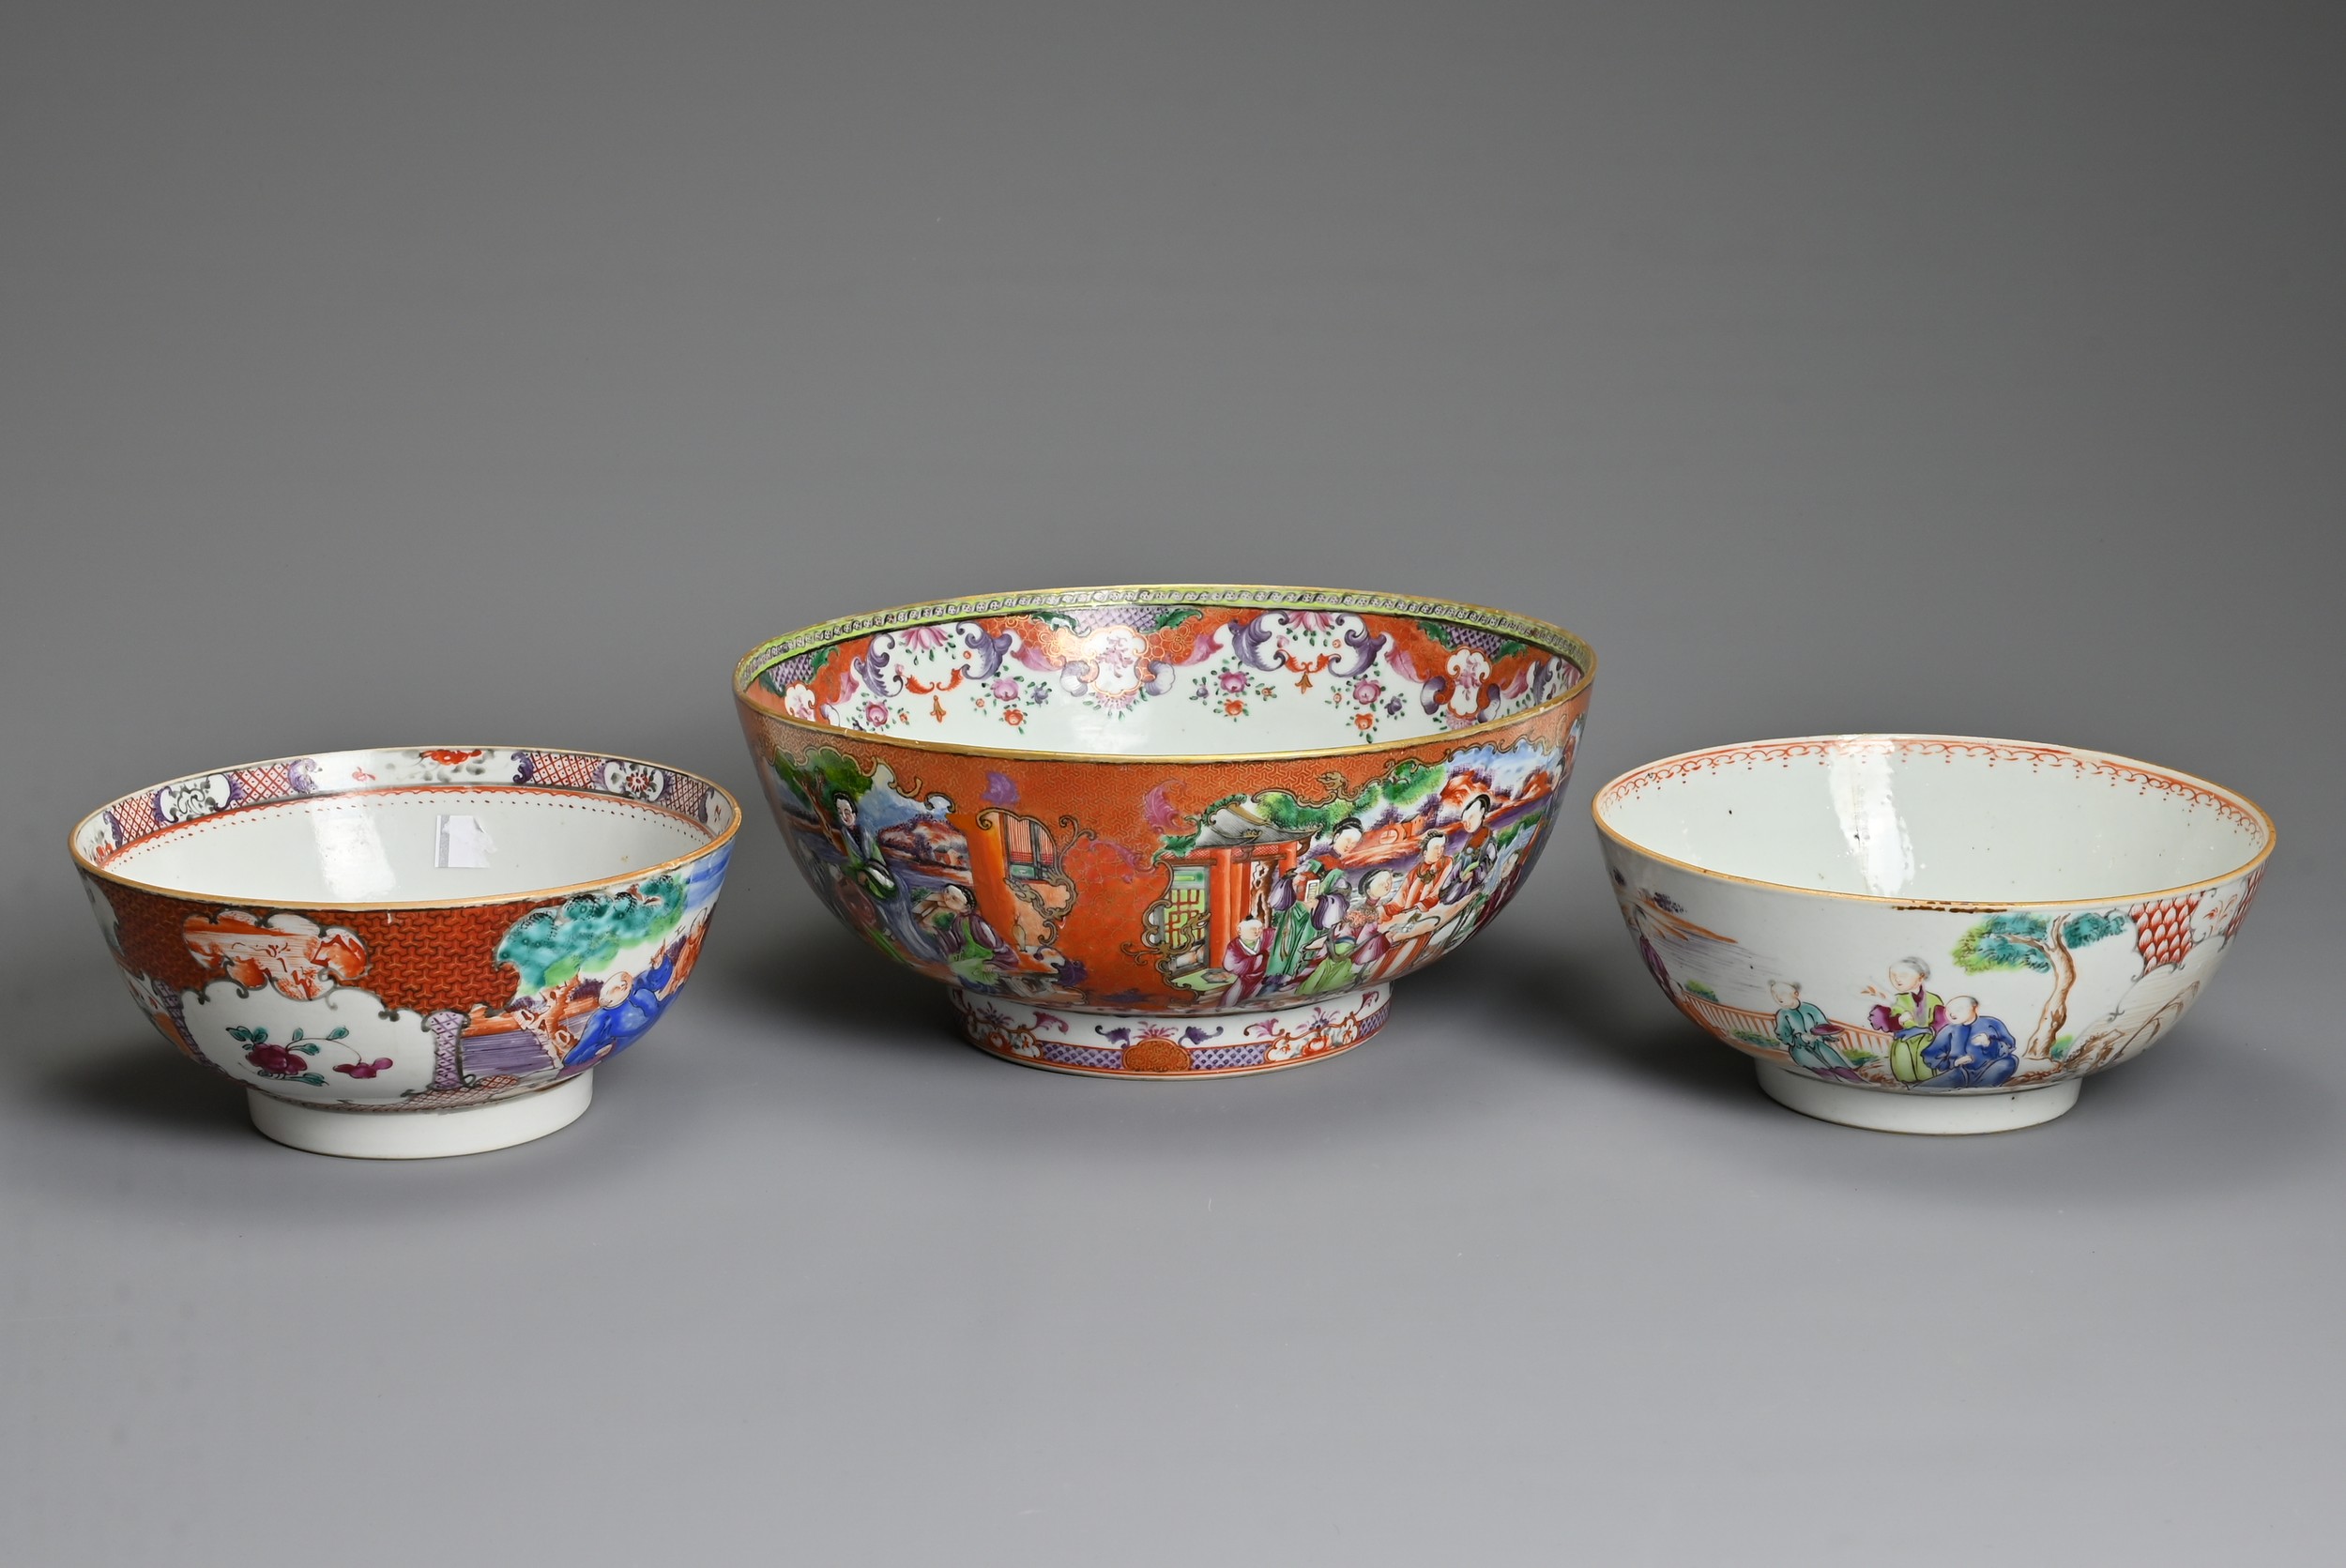 THREE CHINESE FAMILLE ROSE PORCELAIN BOWLS, 18TH CENTURY. Of graduating sizes decorated with various - Image 2 of 6